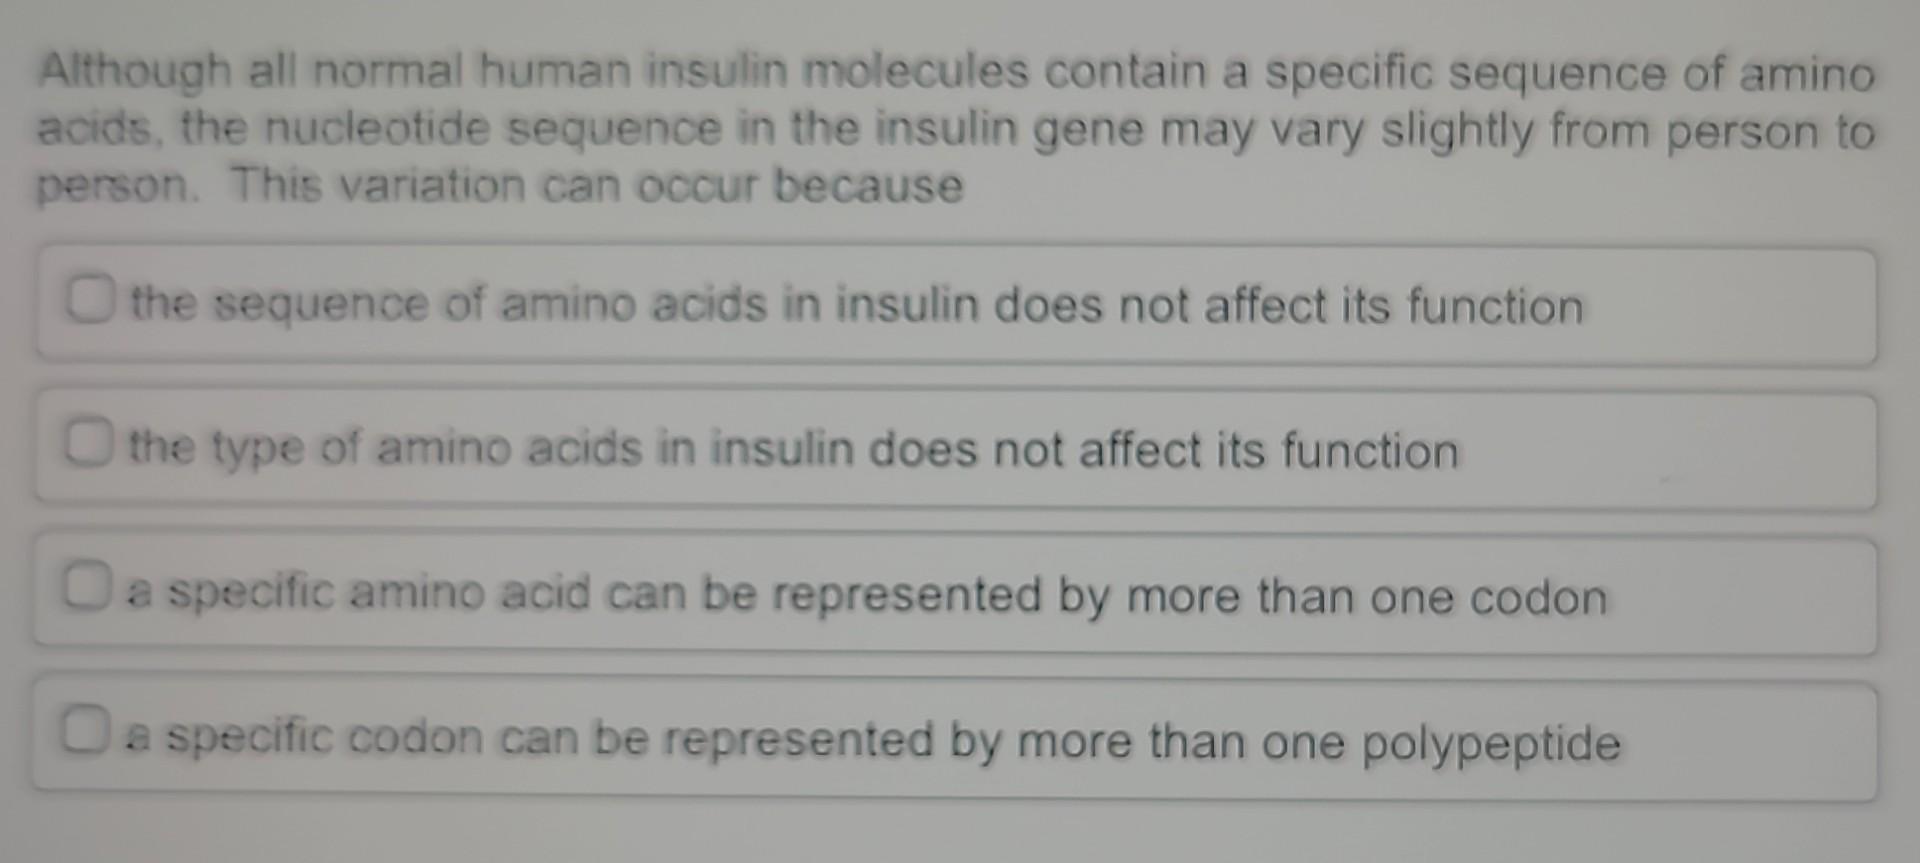 Although all normal human insulin molecules contain a specific sequence of amino acids, the nucleotide sequence in the insuli